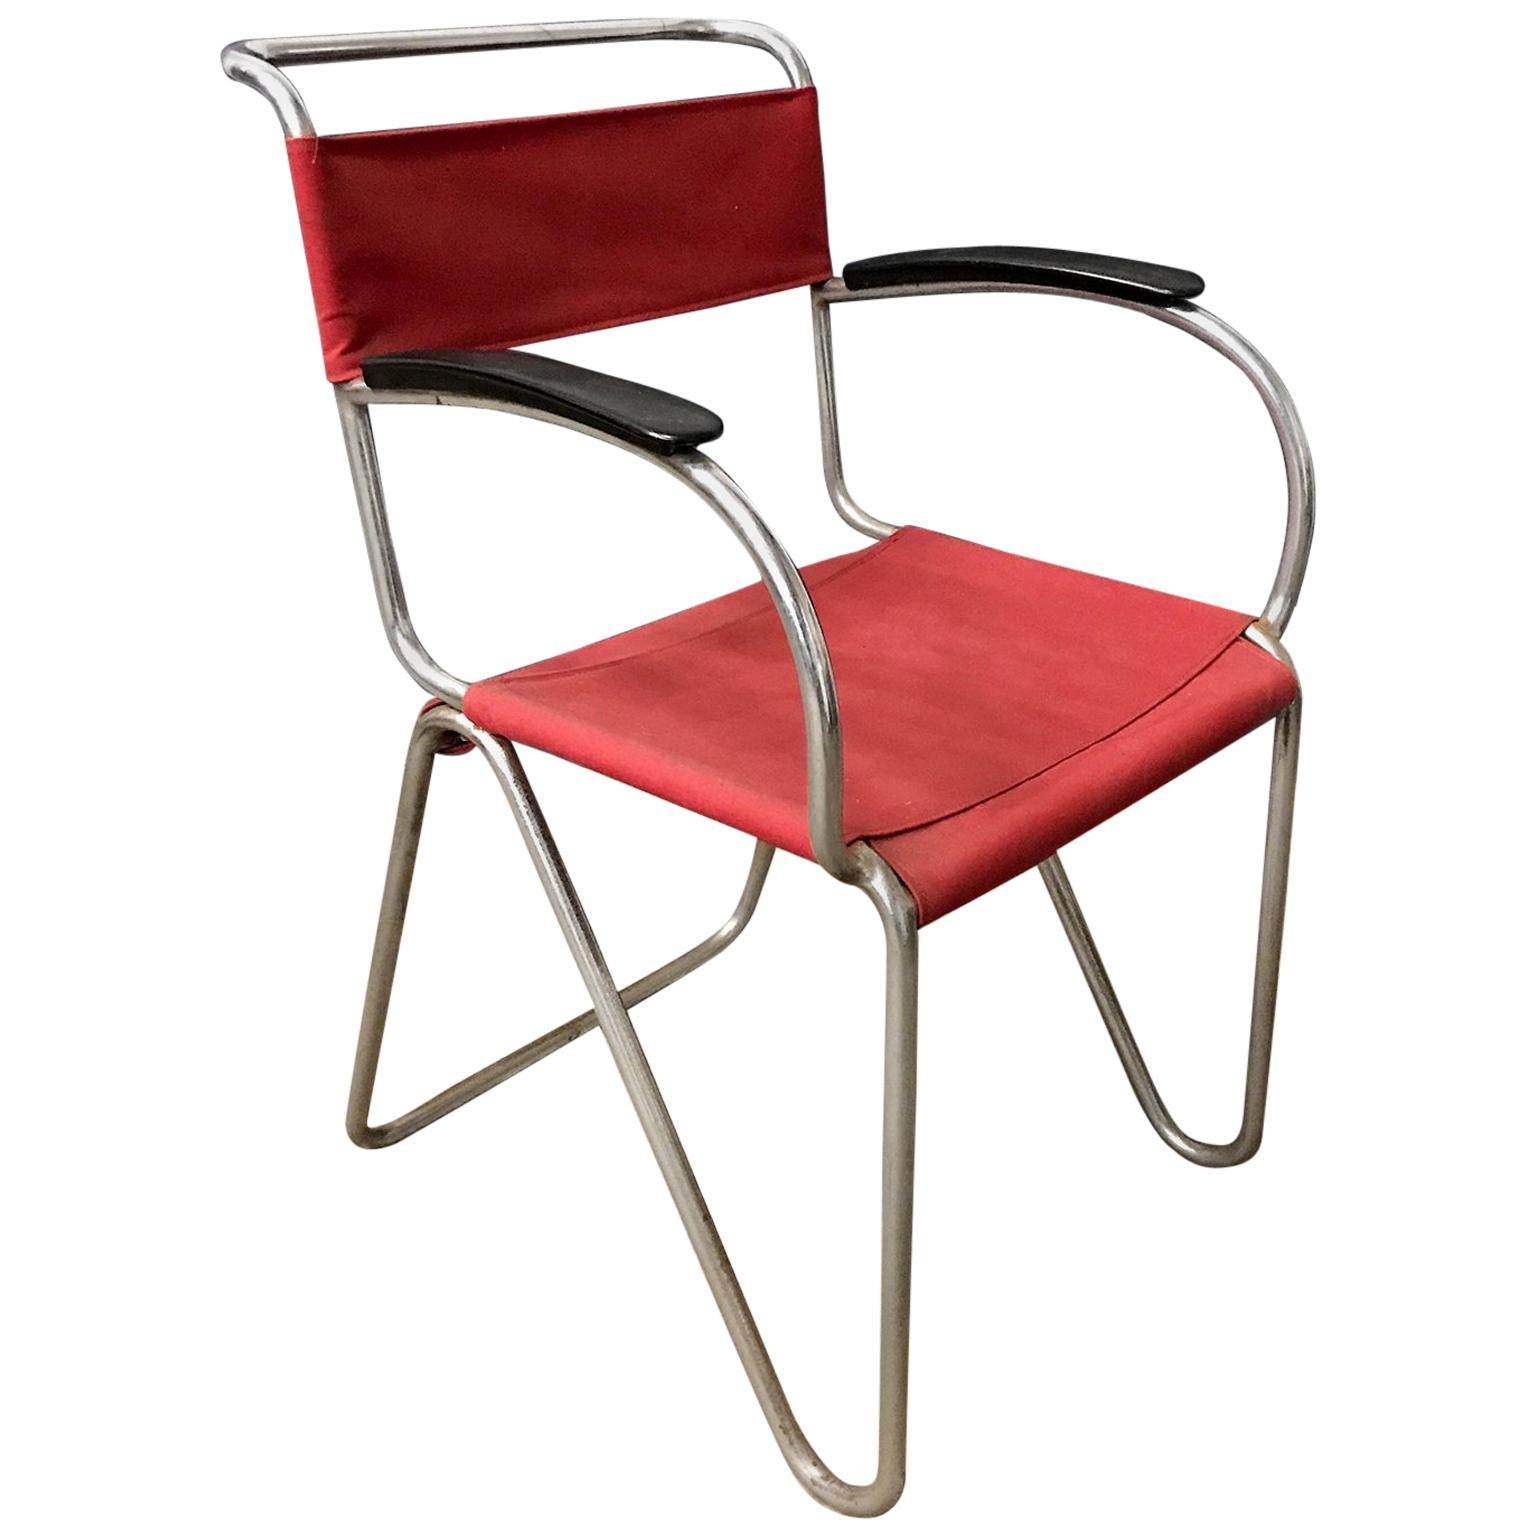 1930, W.H. Gispen for Gispen, Diagonal Chair 1930 in Rope & New Red Canvas Cover